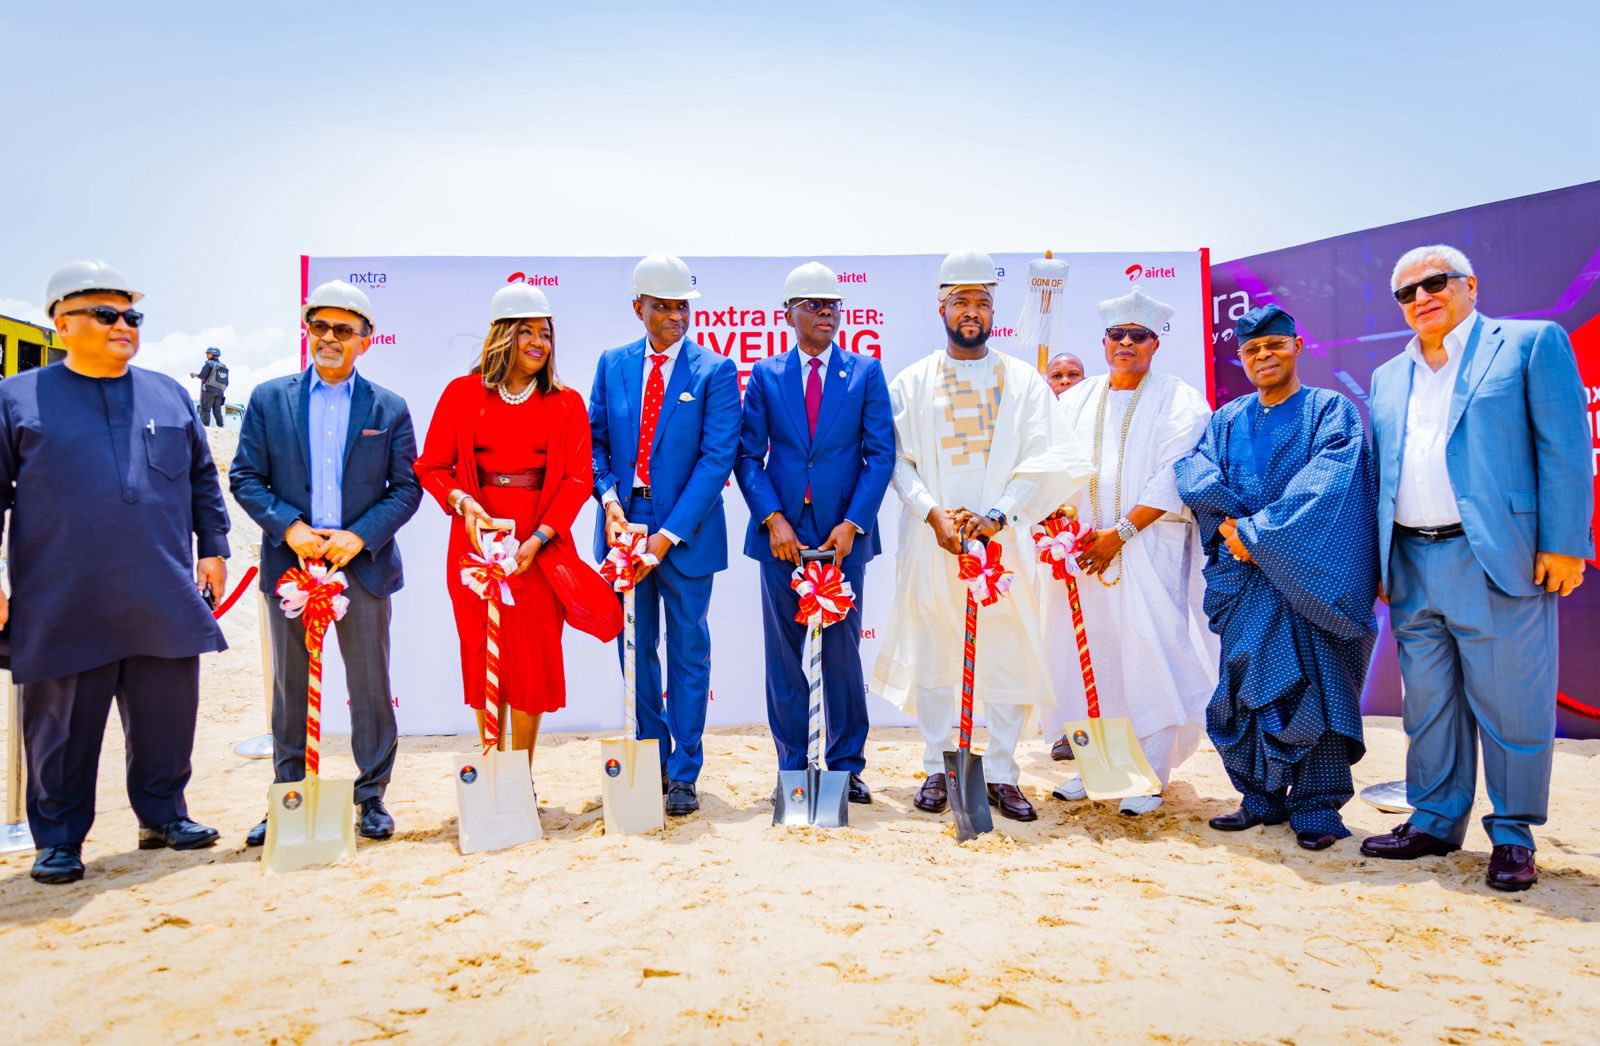 Photos: Airtel helping to accelerate Nigeria’s digital economy, Minister says at NXTRA data centre groundbreaking in Lagos